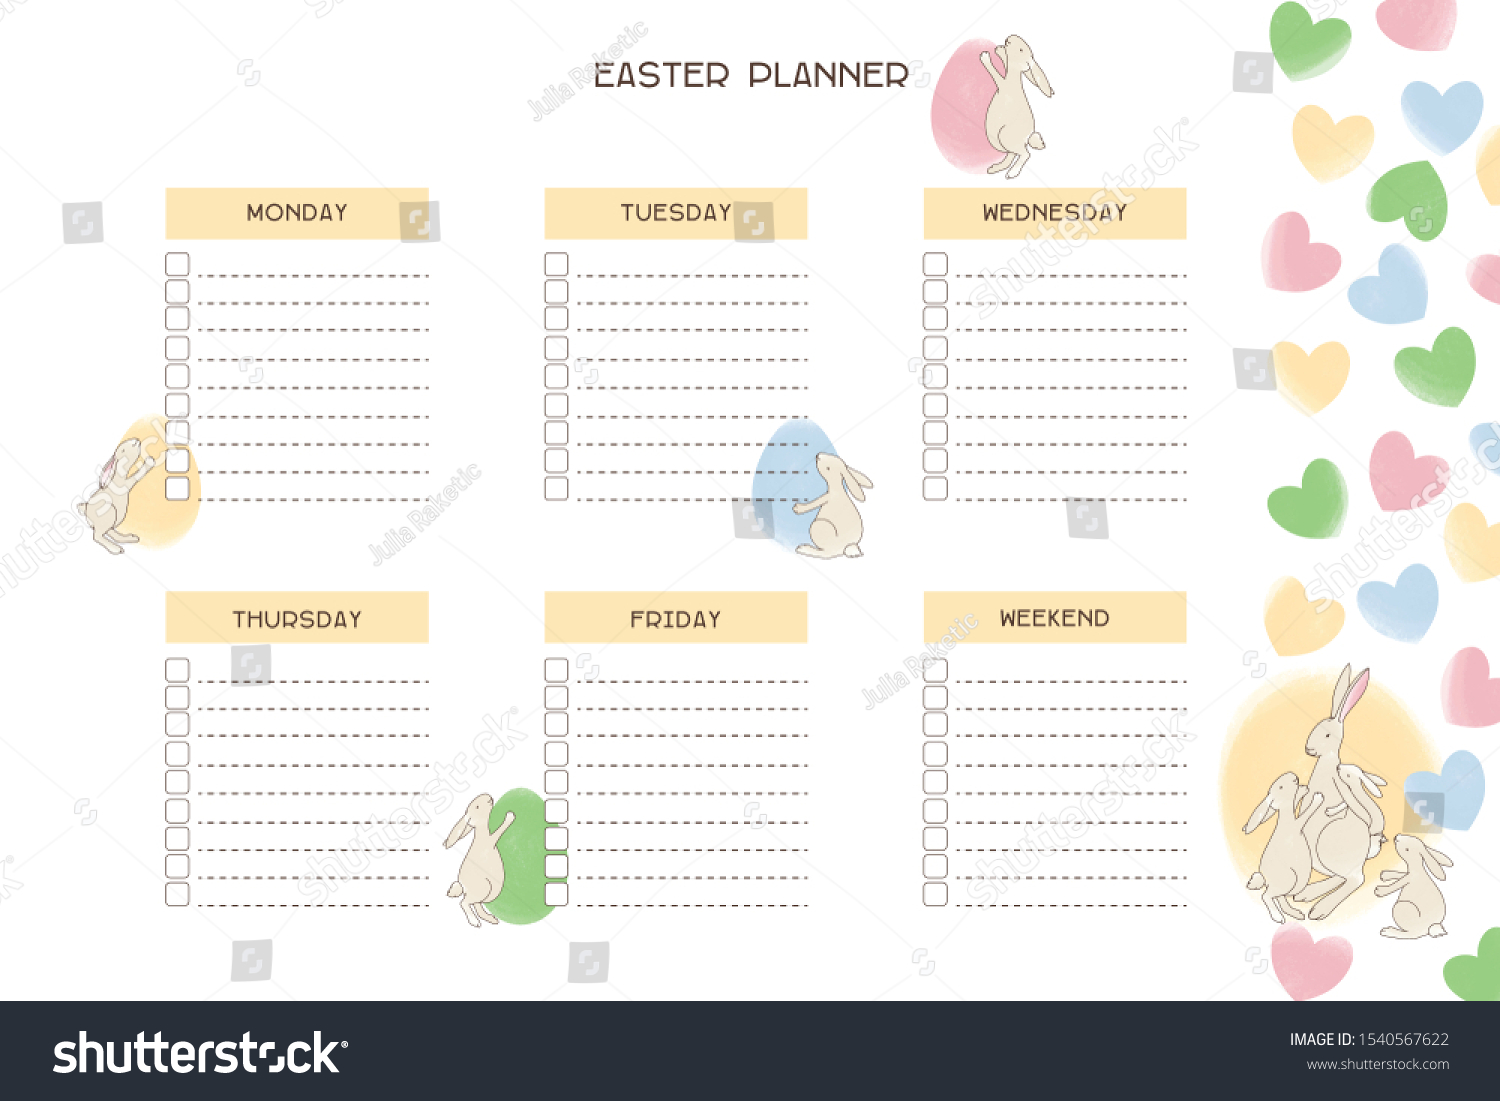 Family Weekly Calendar Template from image.shutterstock.com